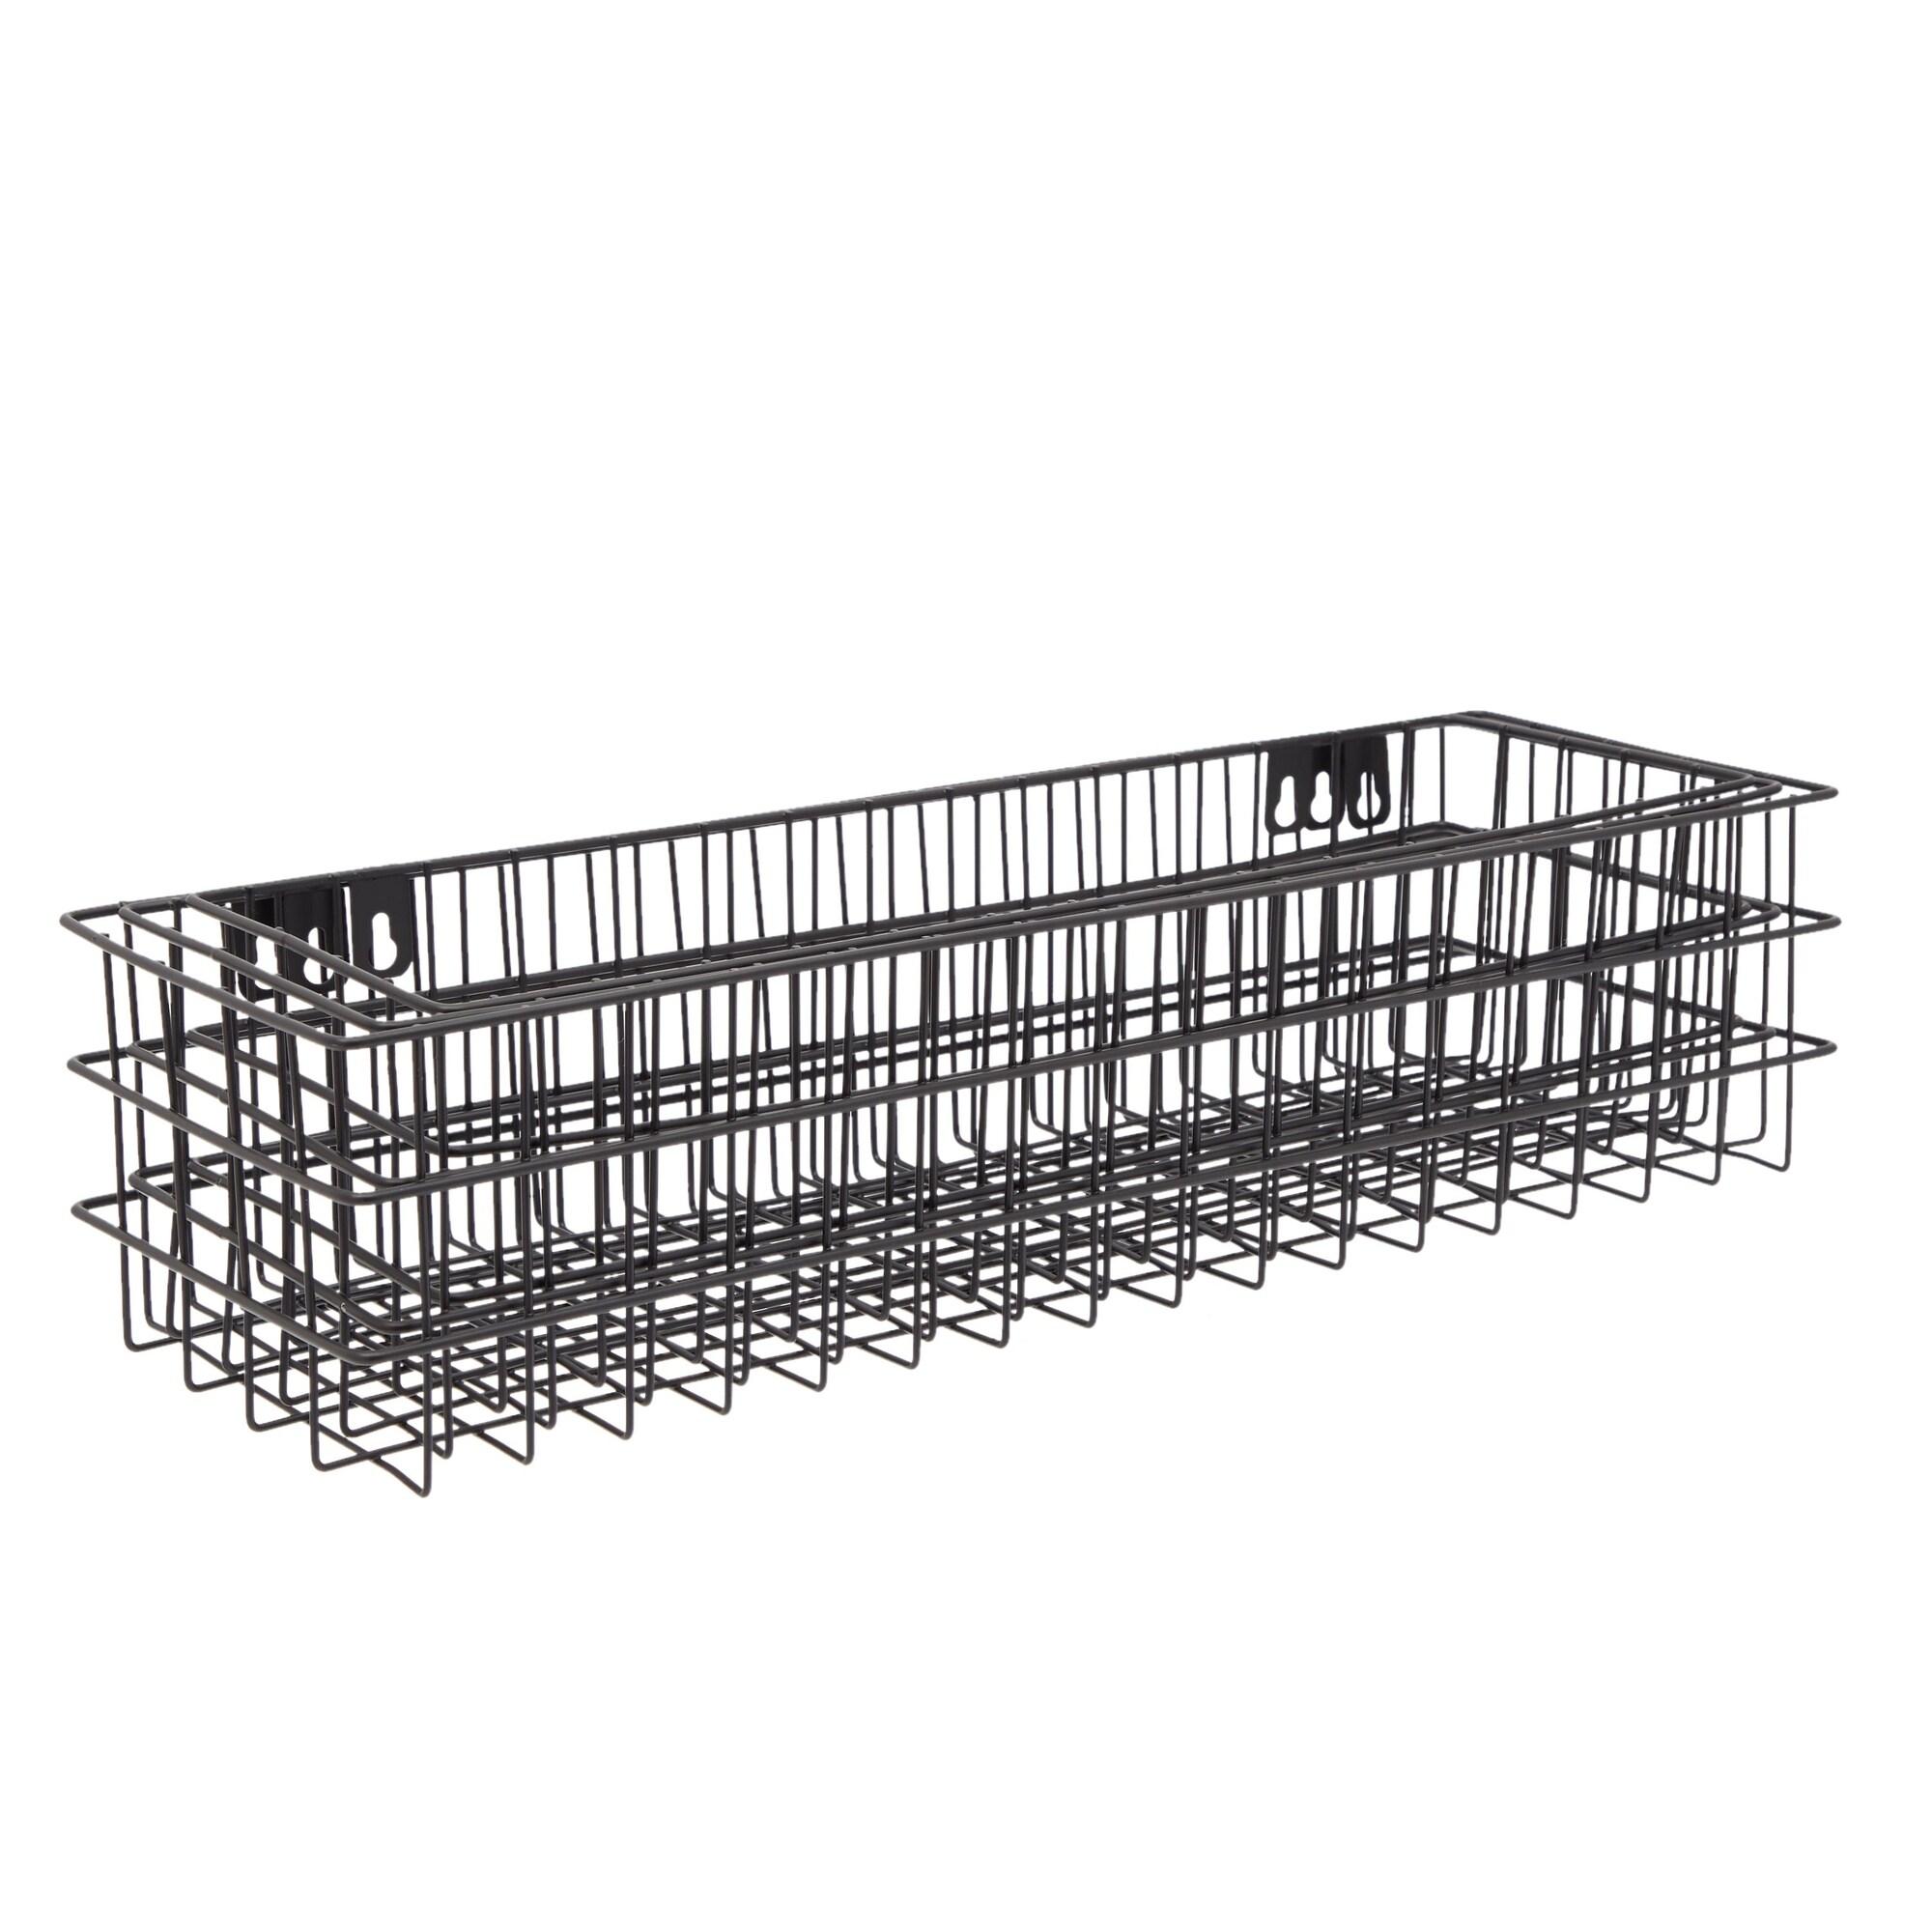 https://ak1.ostkcdn.com/images/products/is/images/direct/34e202f366f85c2de1ddda43742881fcb02c4cee/Black-Wall-Mounted-Wire-Baskets%2C-Hanging-Organizers-for-Kitchen-Storage%2C-Assorted-Sizes-%283-Pieces%29.jpg